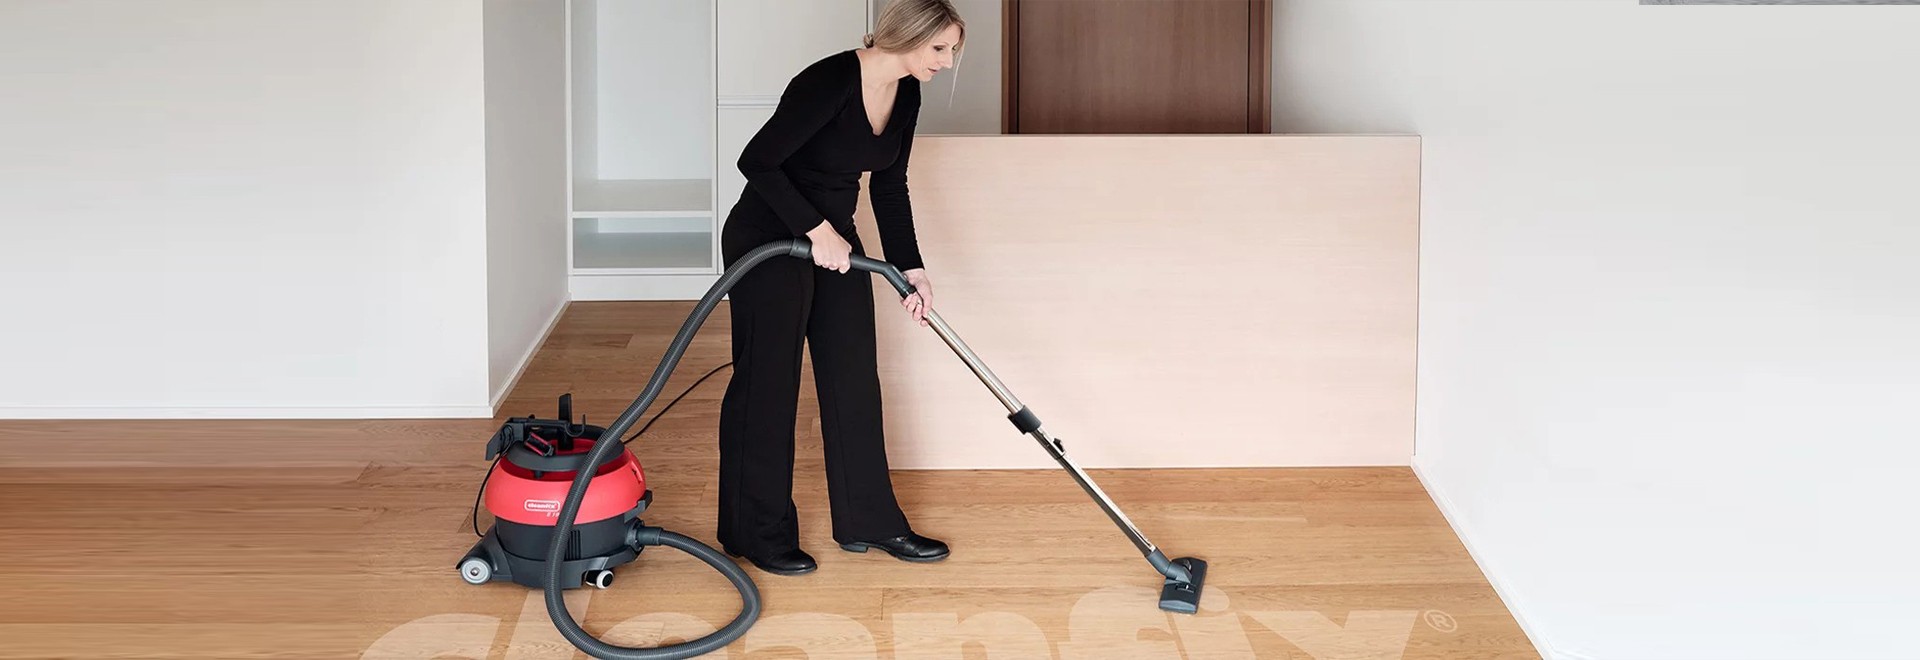 Dry Vacuum Cleaner - Cleaning